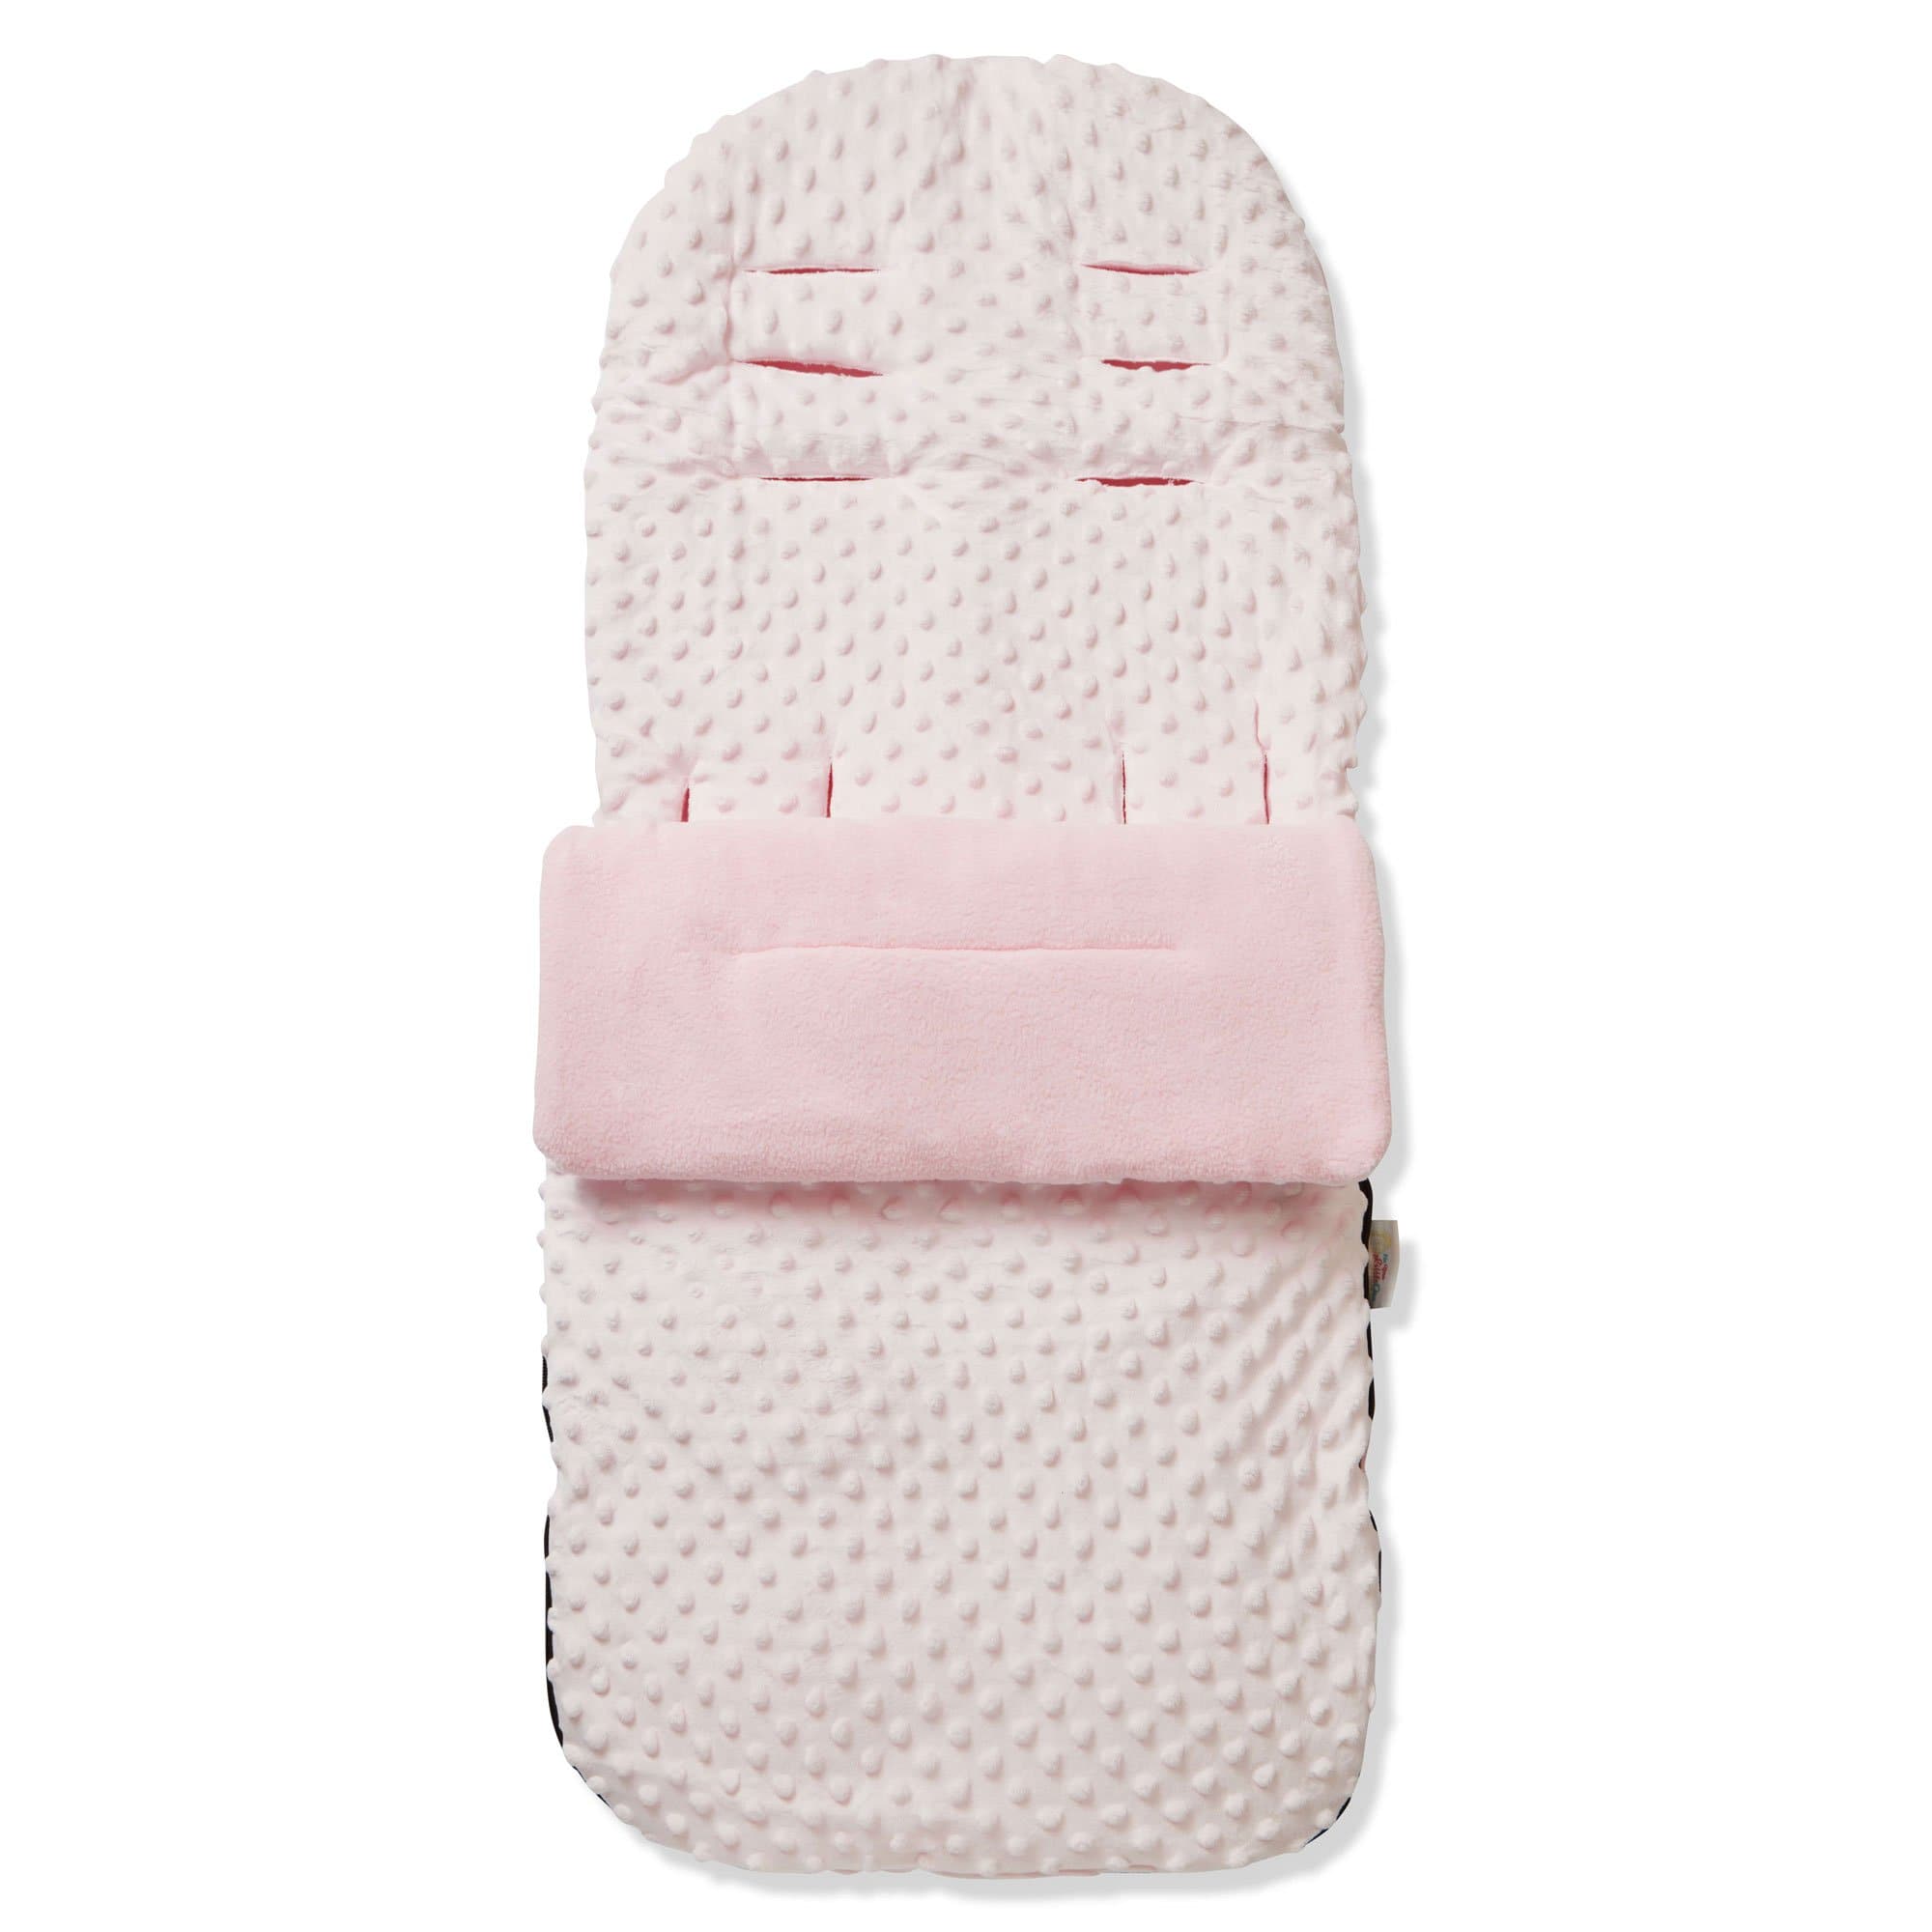 Dimple Footmuff / Cosy Toes Compatible with I'coo - Pink / Fits All Models | For Your Little One